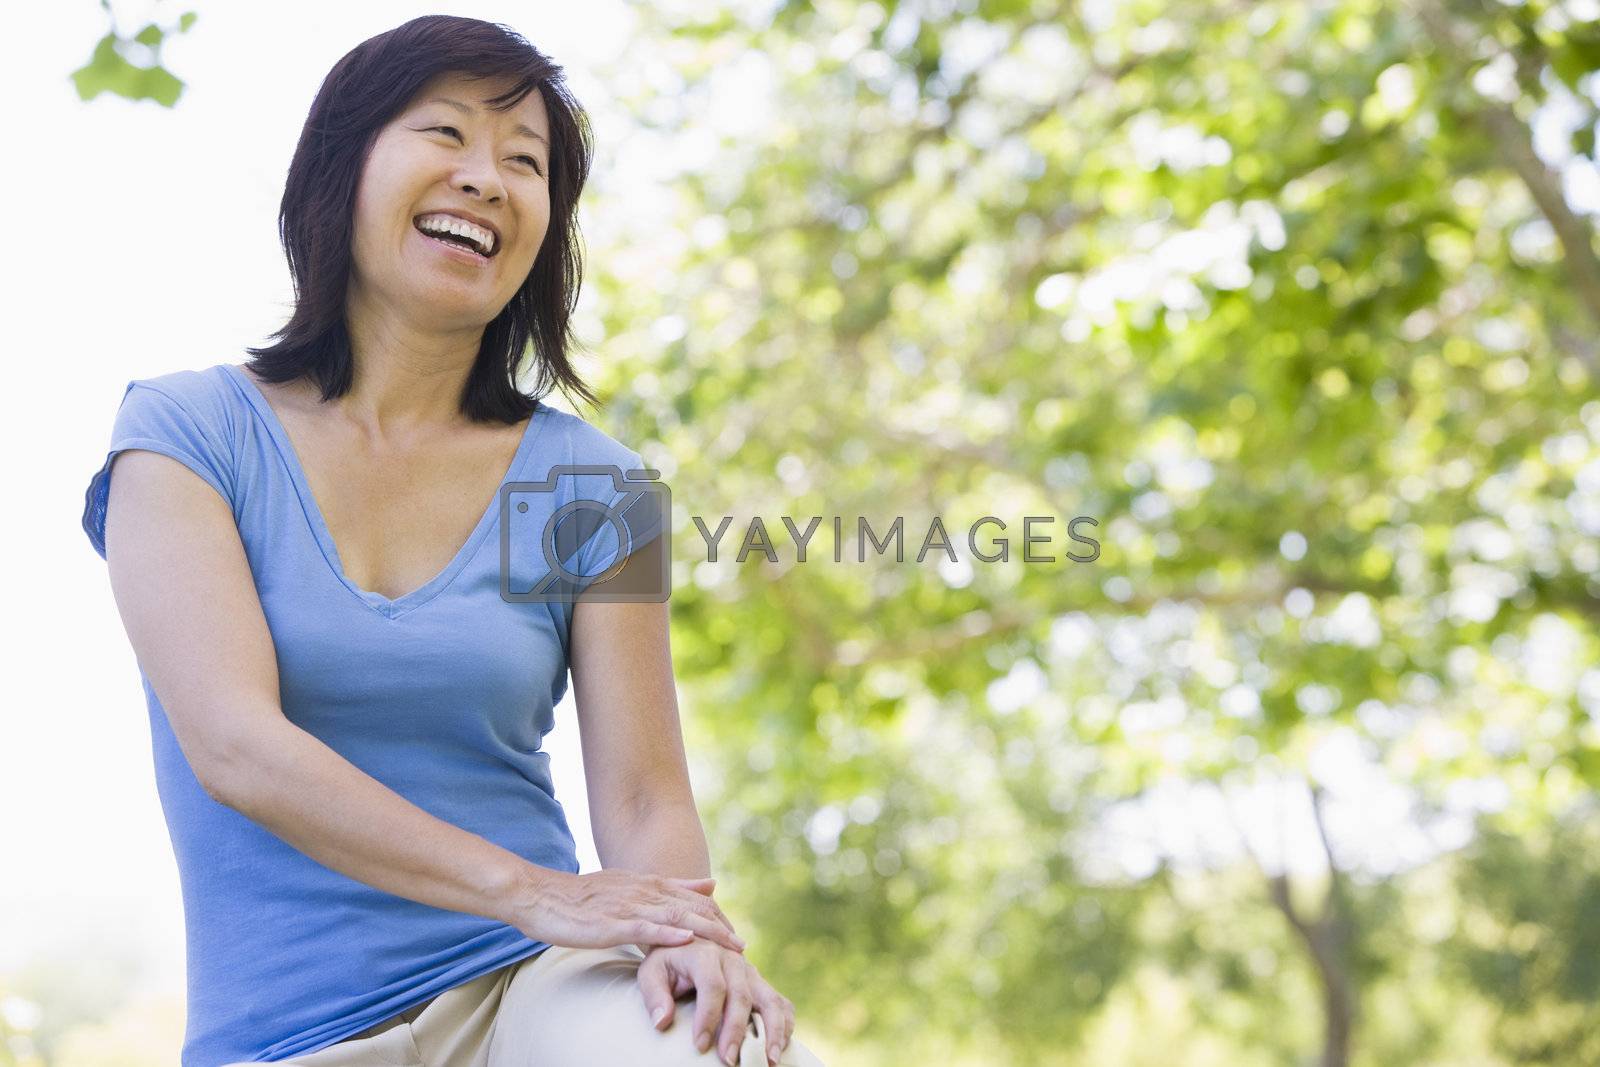 Royalty free image of Woman sitting outdoors smiling by MonkeyBusiness